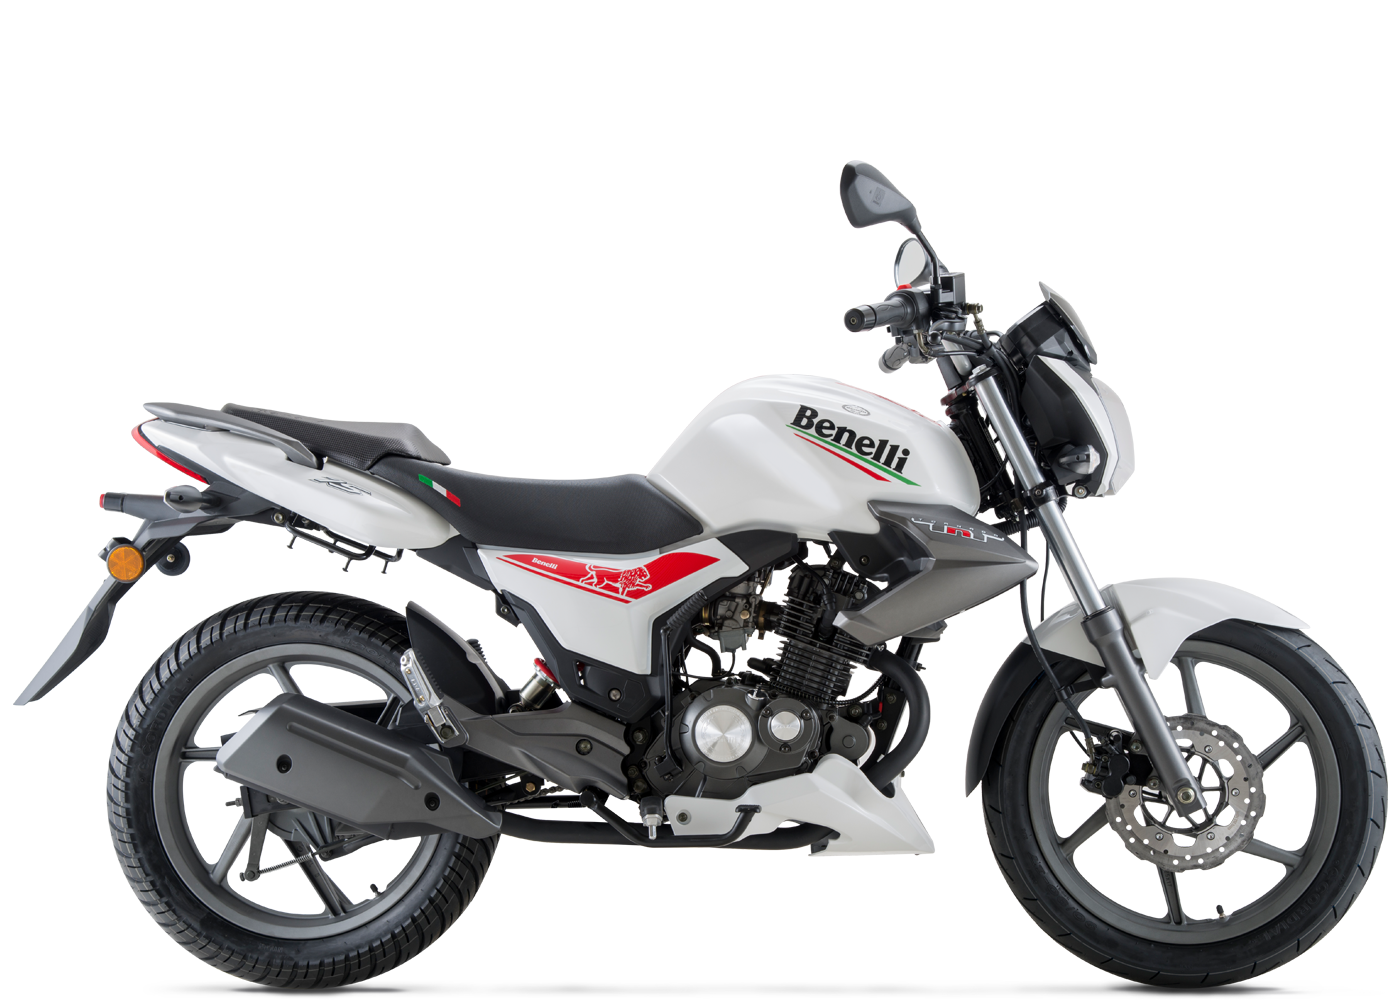 TNT 15 - Benelli Q.J. | Motorcycles and scooters